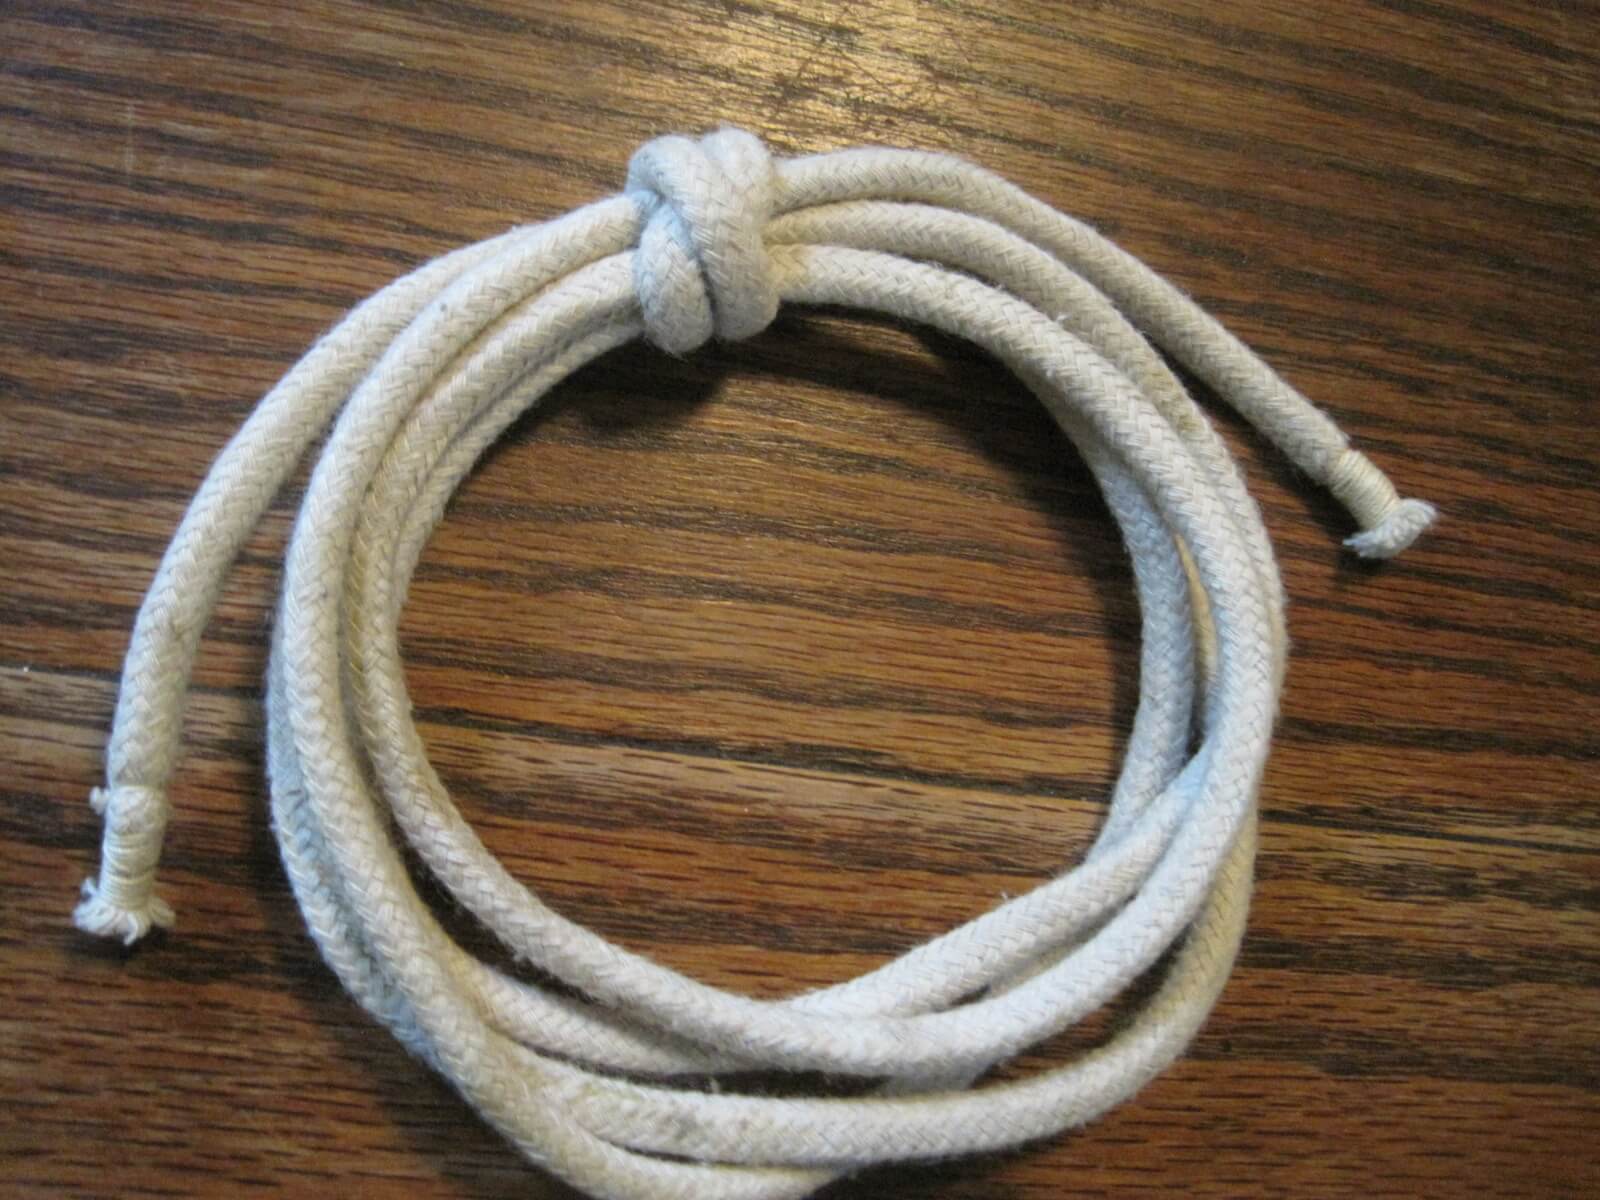 practice rope used for a useful knot